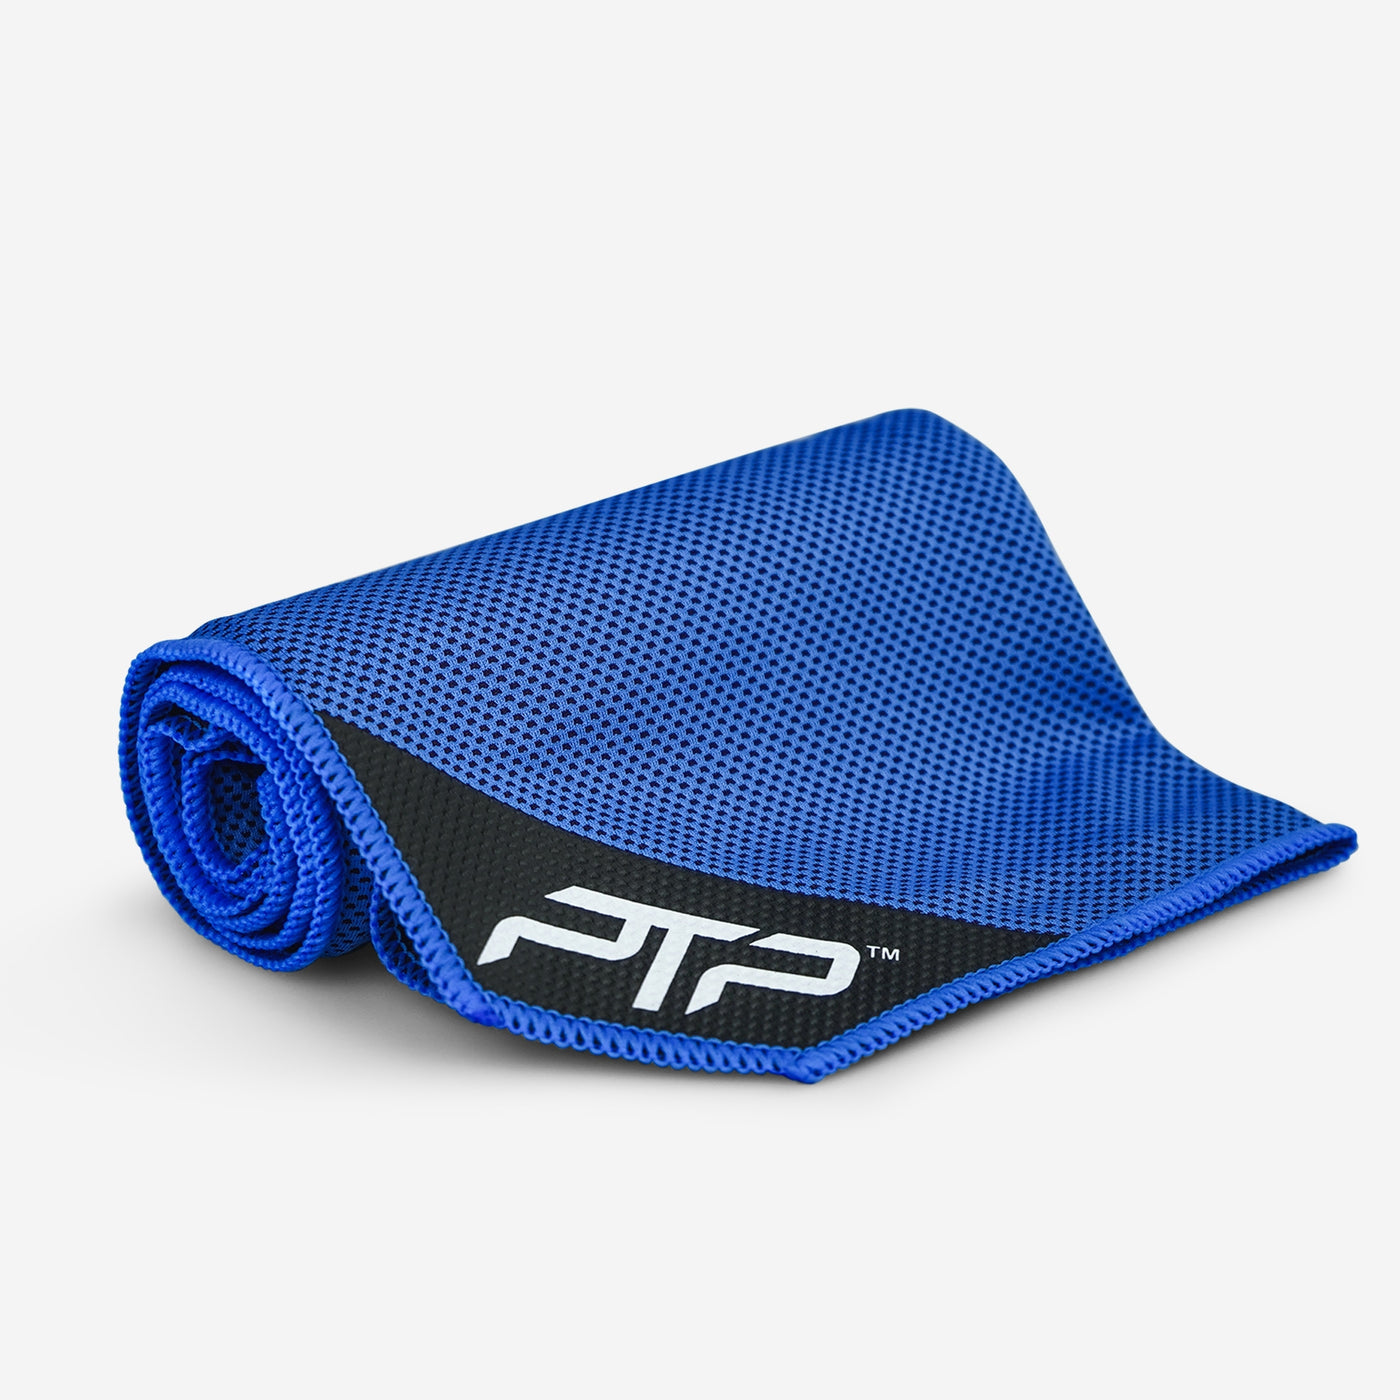 PTP Hyper Cool Towel in Blue - Perfect for all Activities